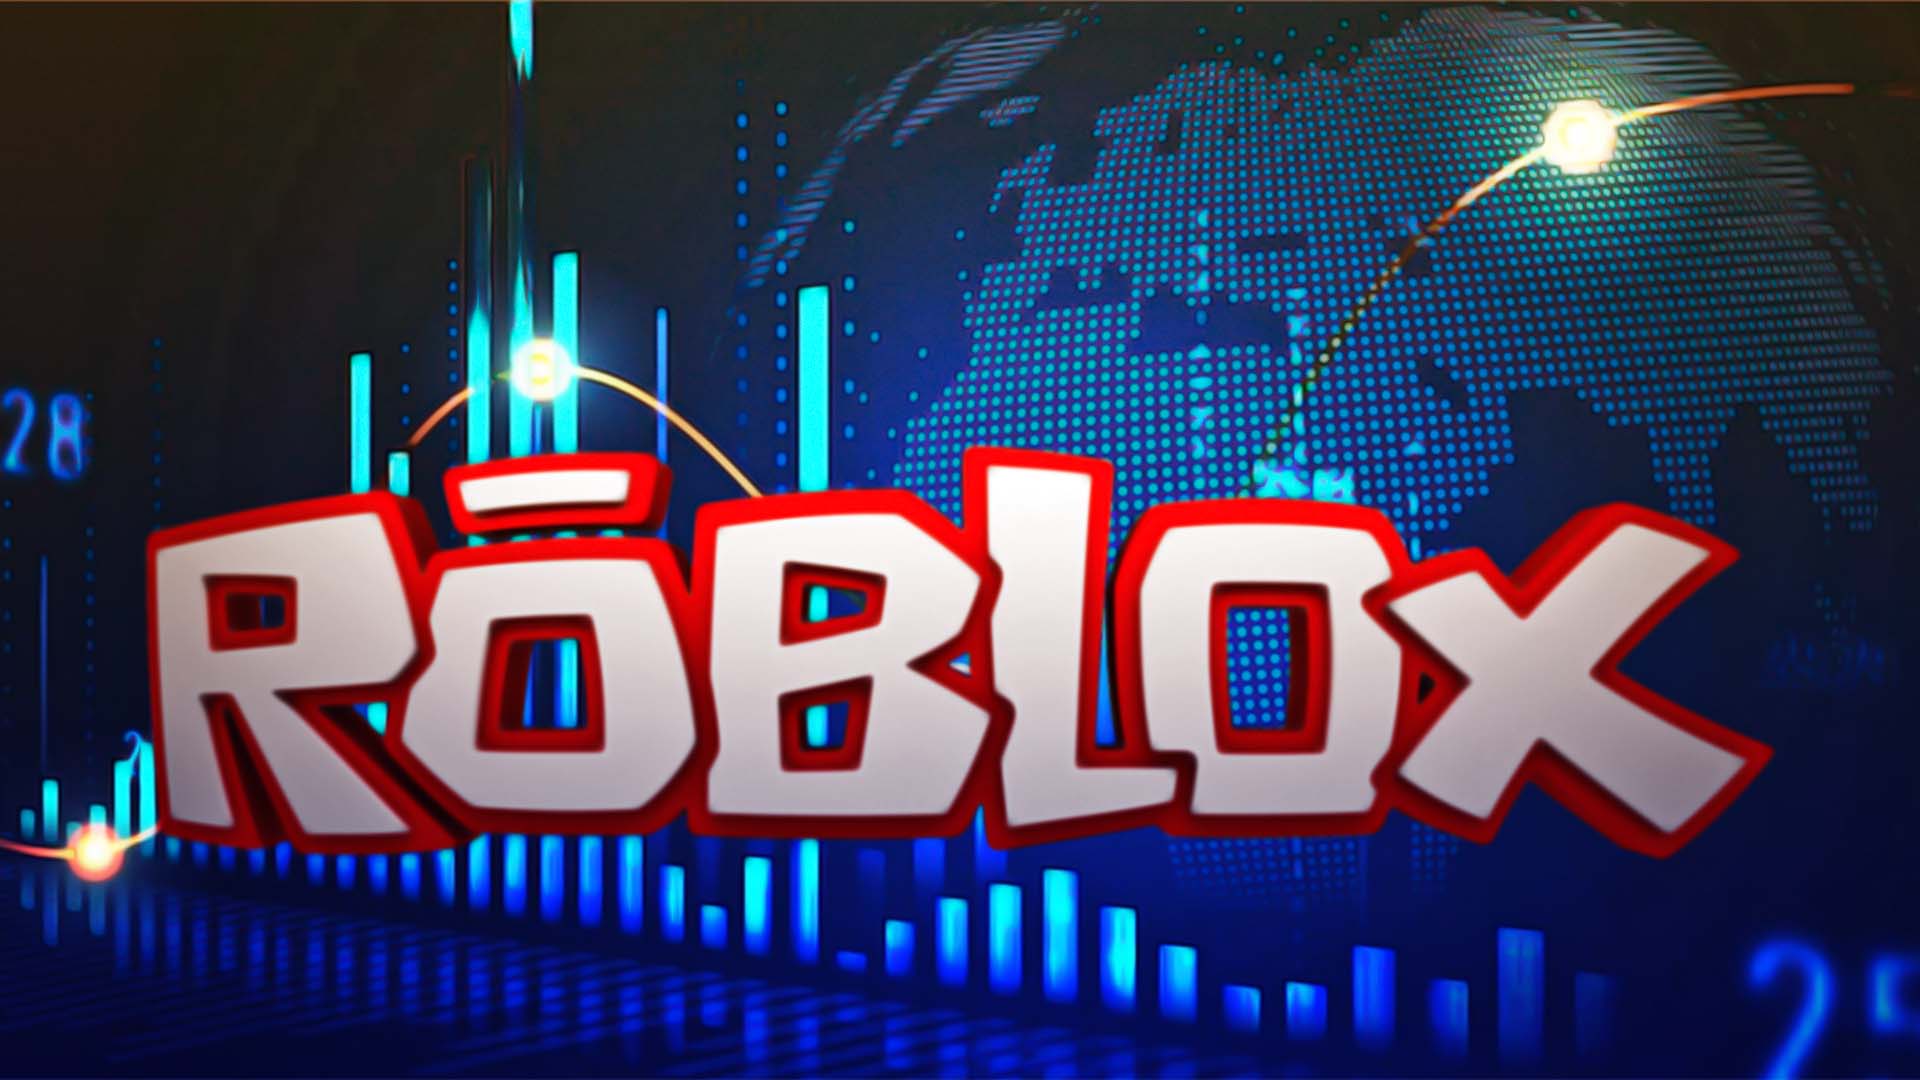 Roblox (RBLX) Stock Falls After Quarterly Bookings Miss Wall